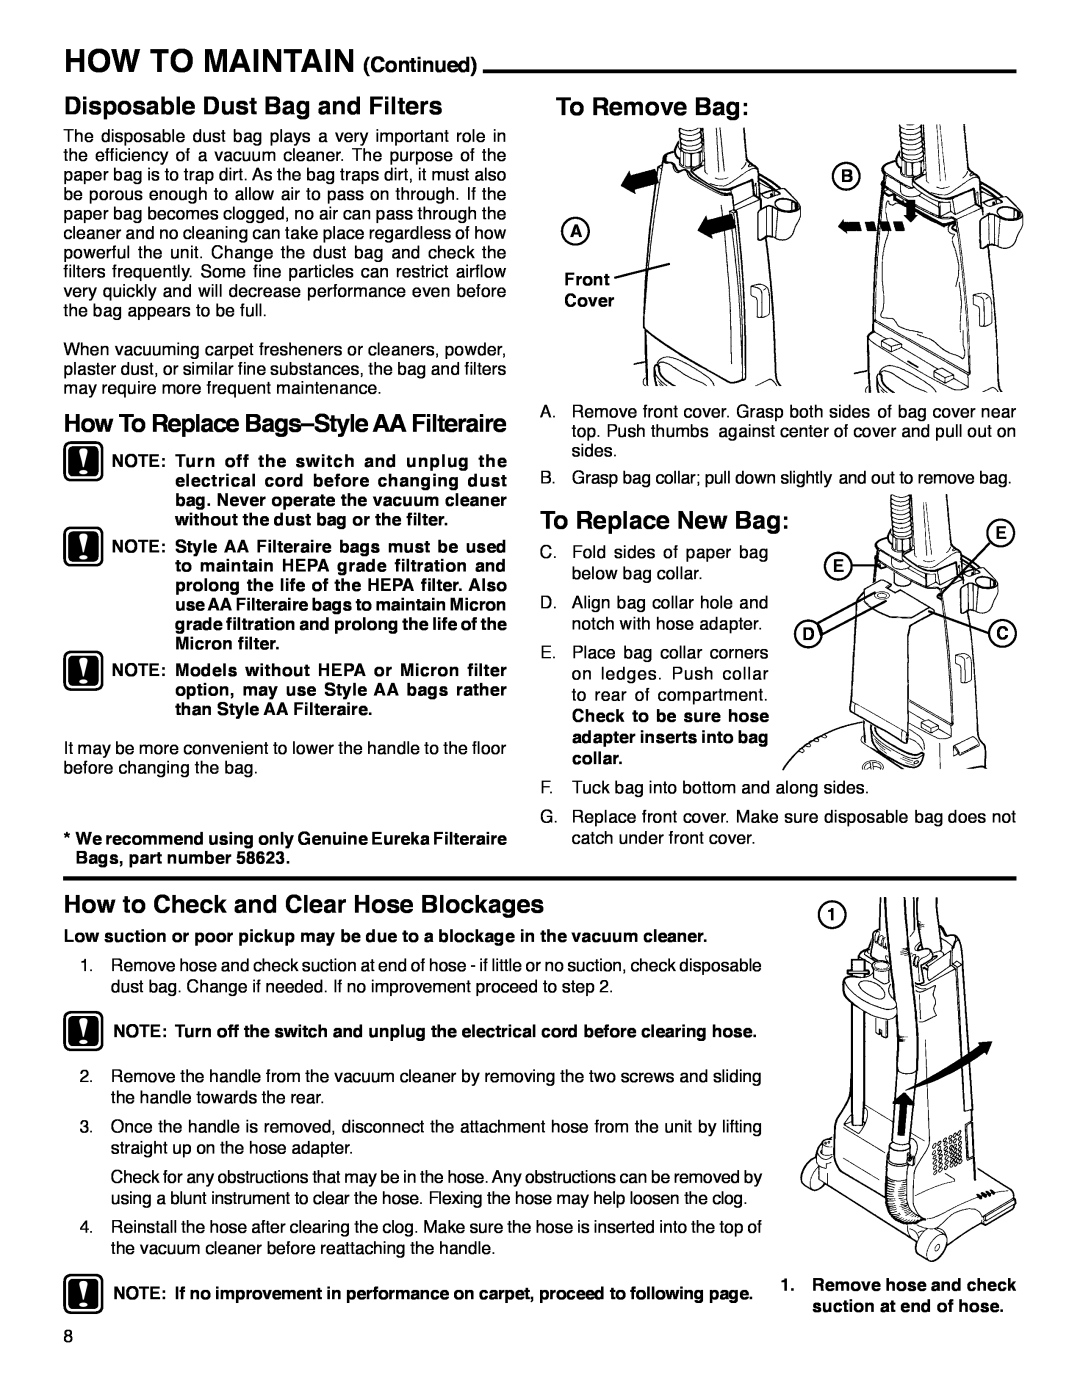 Eureka 4440 -4470 manual HOW TO MAINTAIN Continued, Disposable Dust Bag and Filters, To Remove Bag, To Replace New Bag 